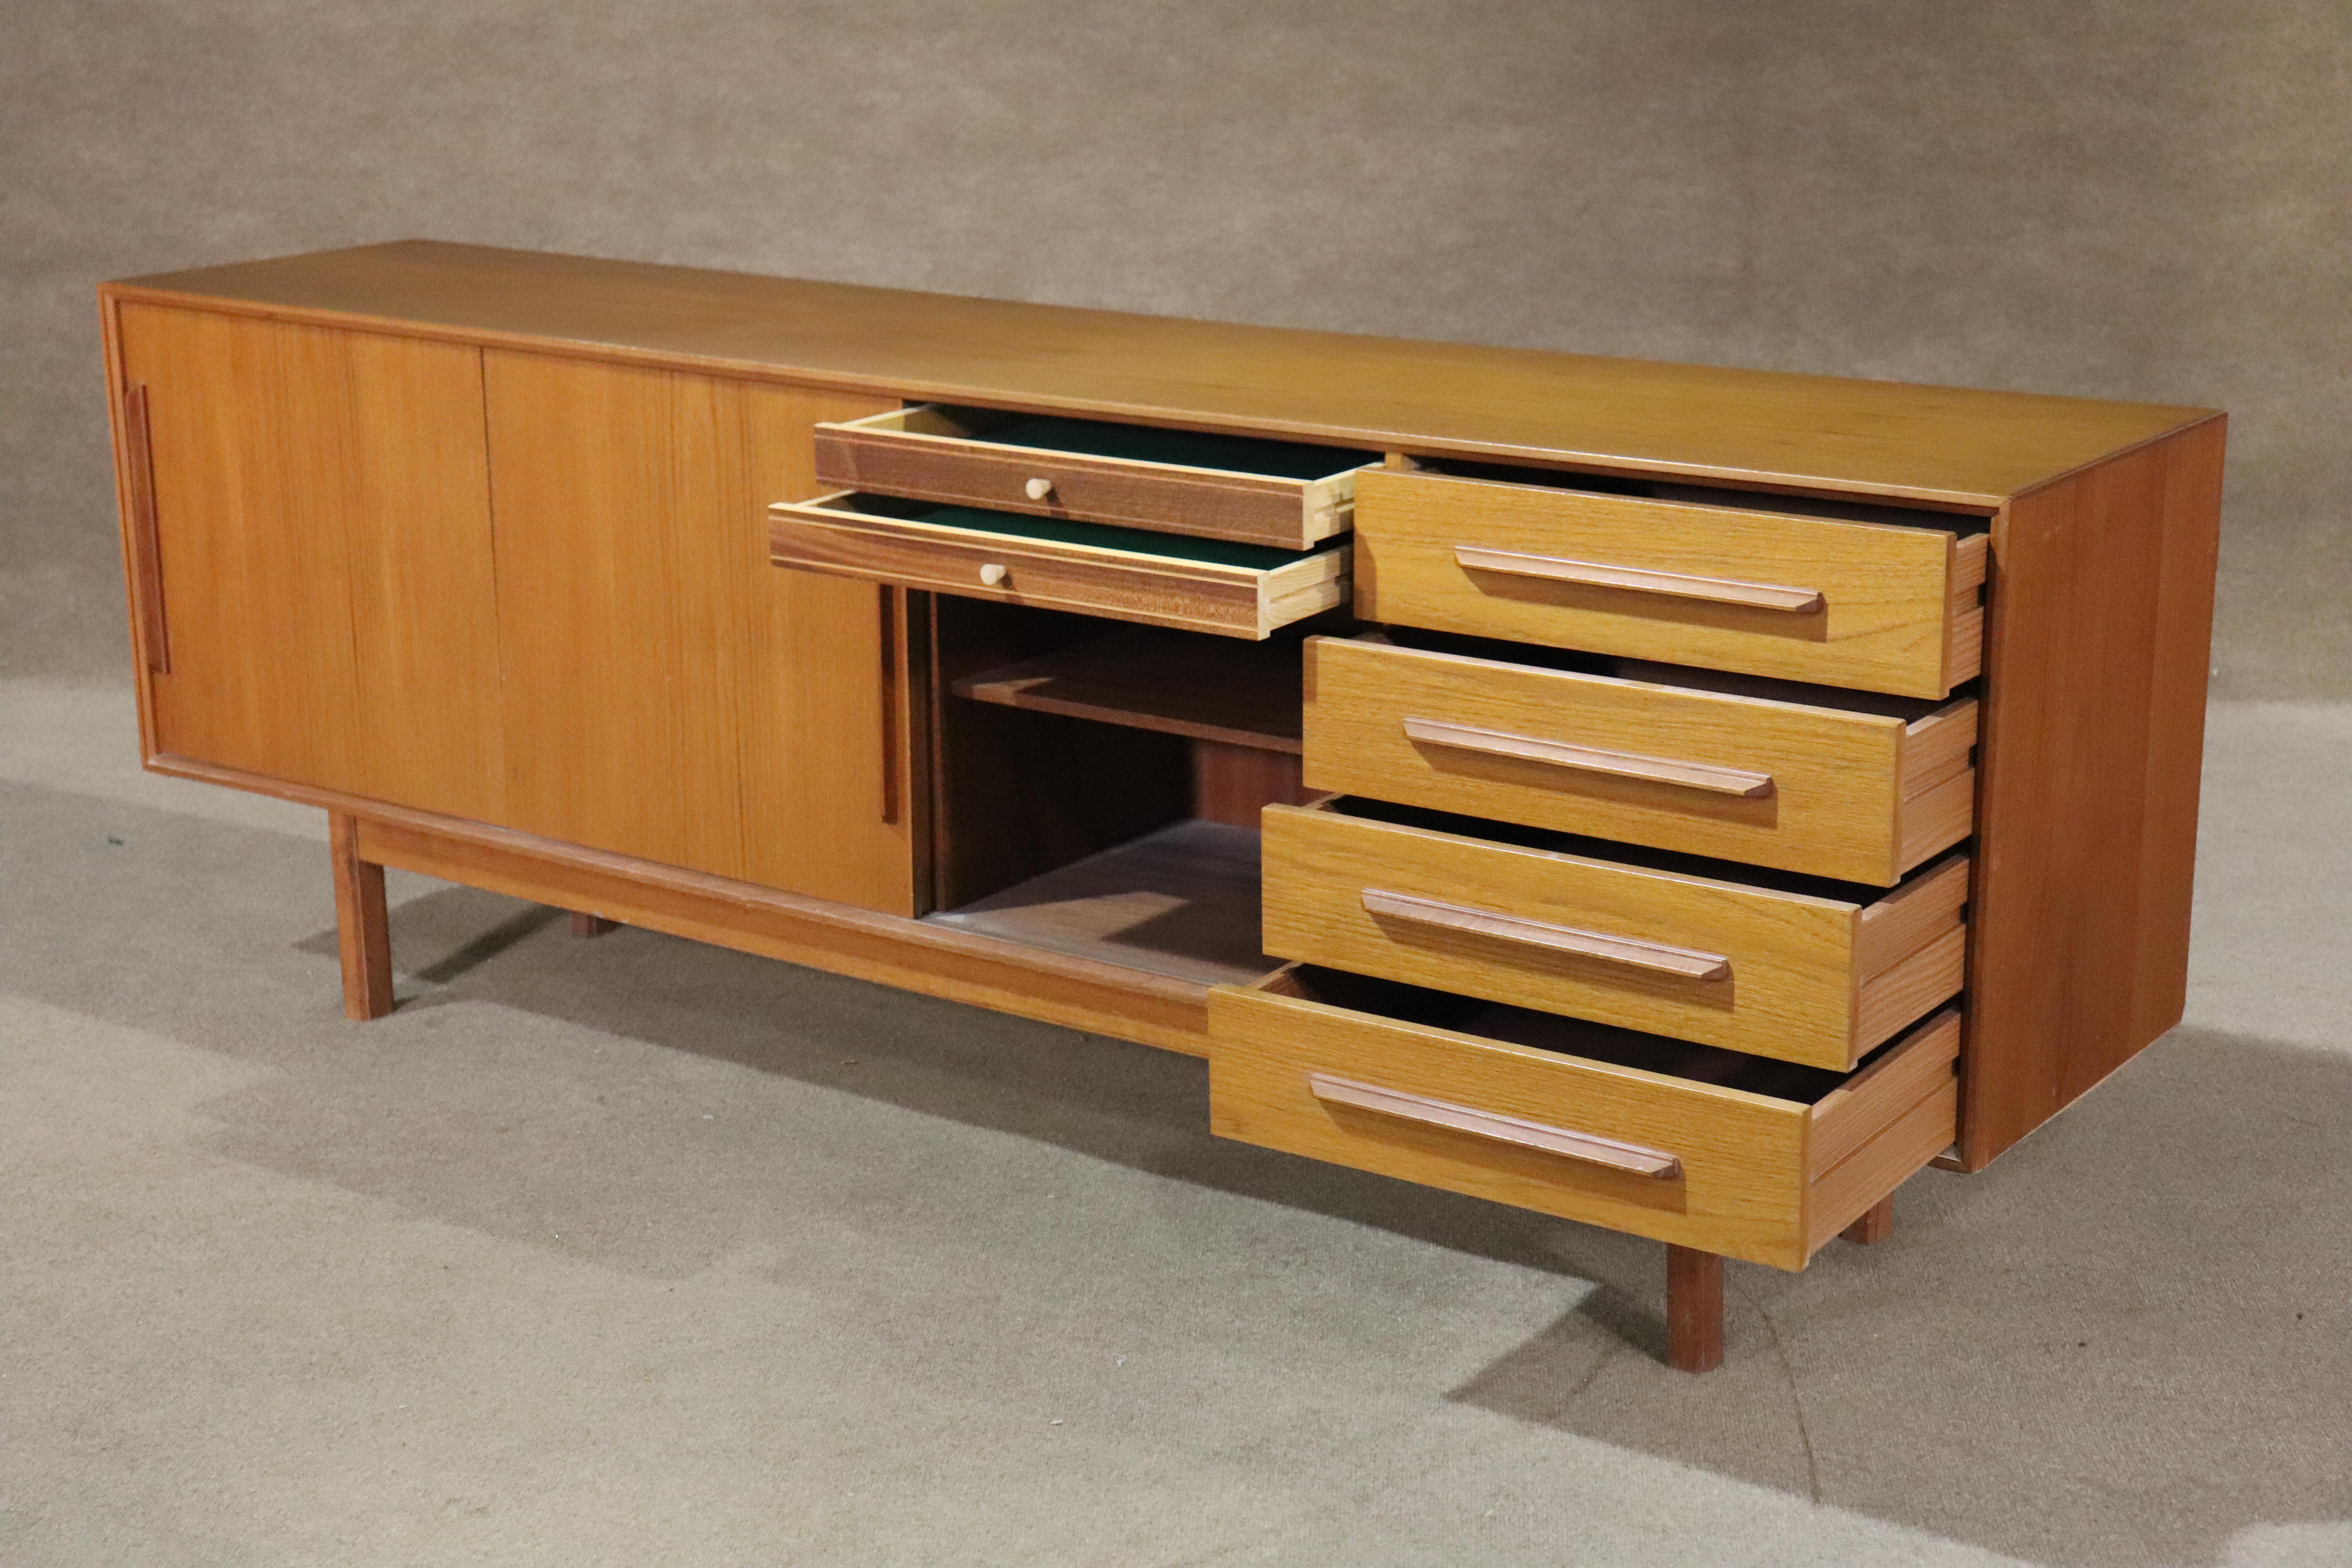 Ib-Kofod Larsen for Faarup Møbelfabrik long sideboard, made in Denmark. Beautiful teak grain throughout with sculpted wood handles. Ample storage with cabinets space and drawers.
Please confirm location NY or NJ